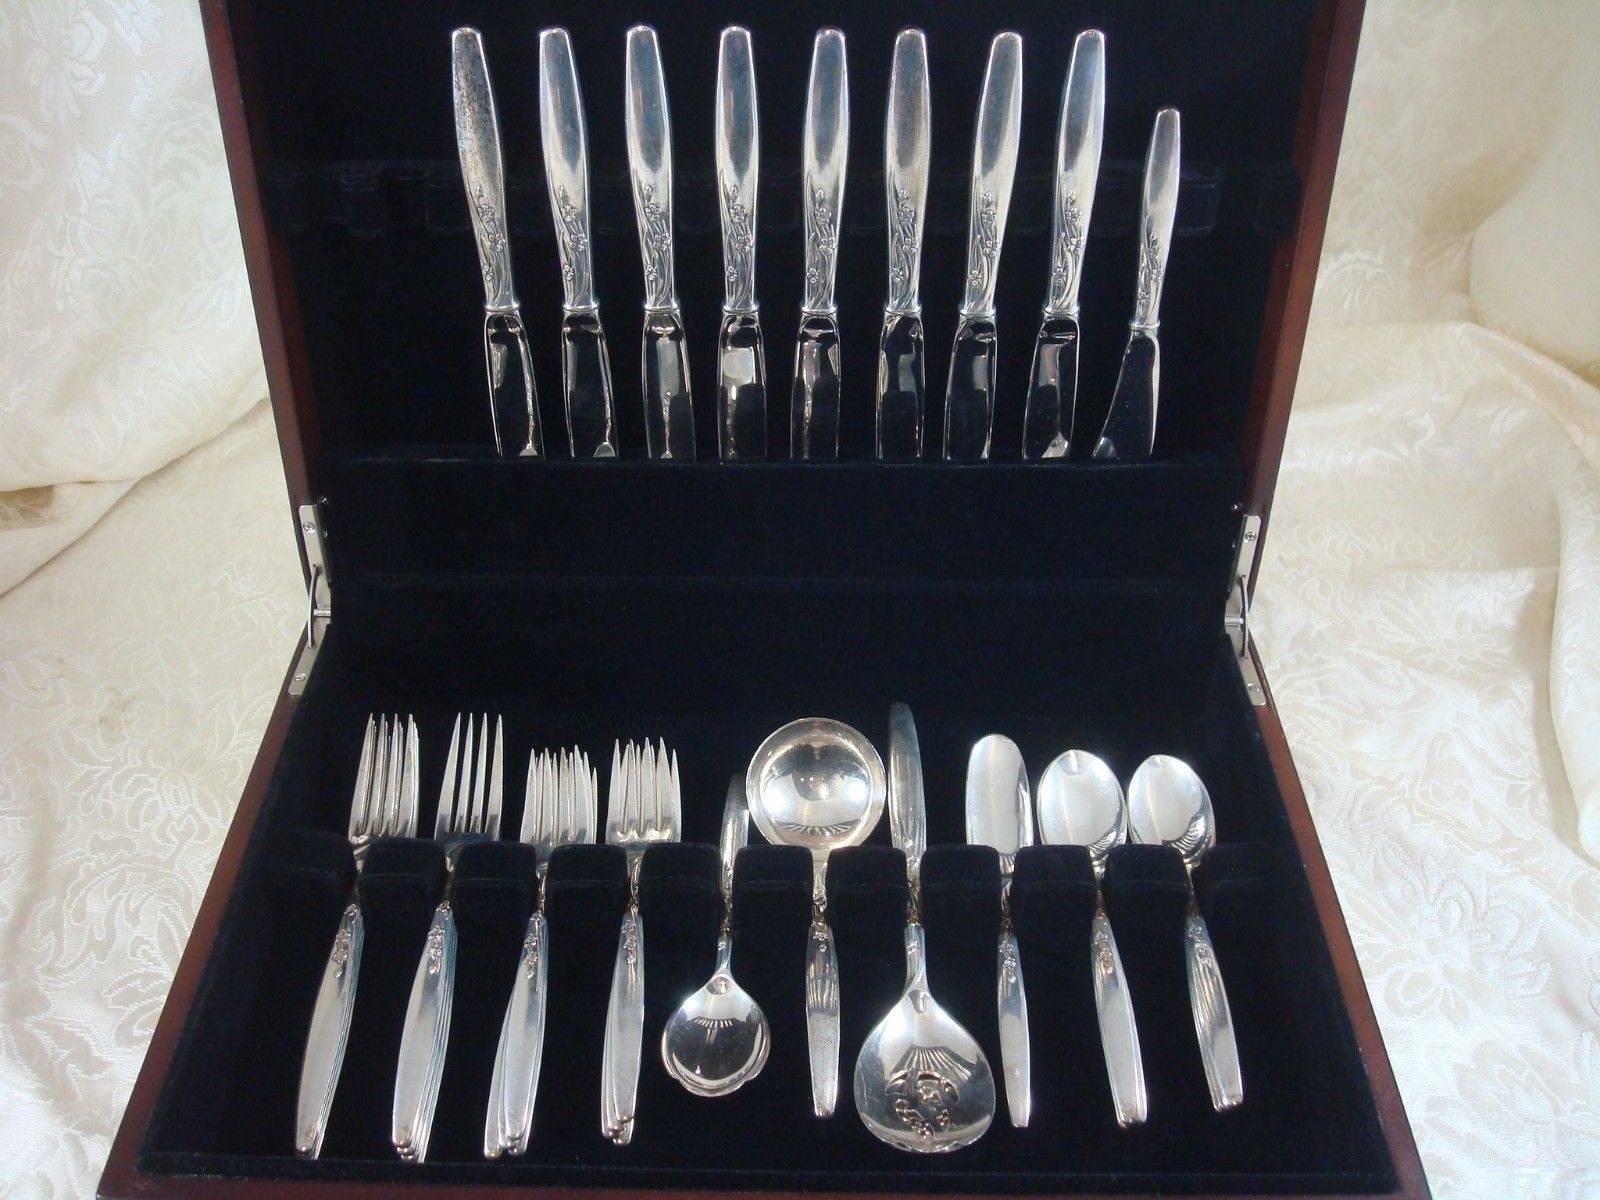 Summer Song by Lunt sterling silver flatware set of 38 pieces. This set includes: 

Eight knives, 9 1/8